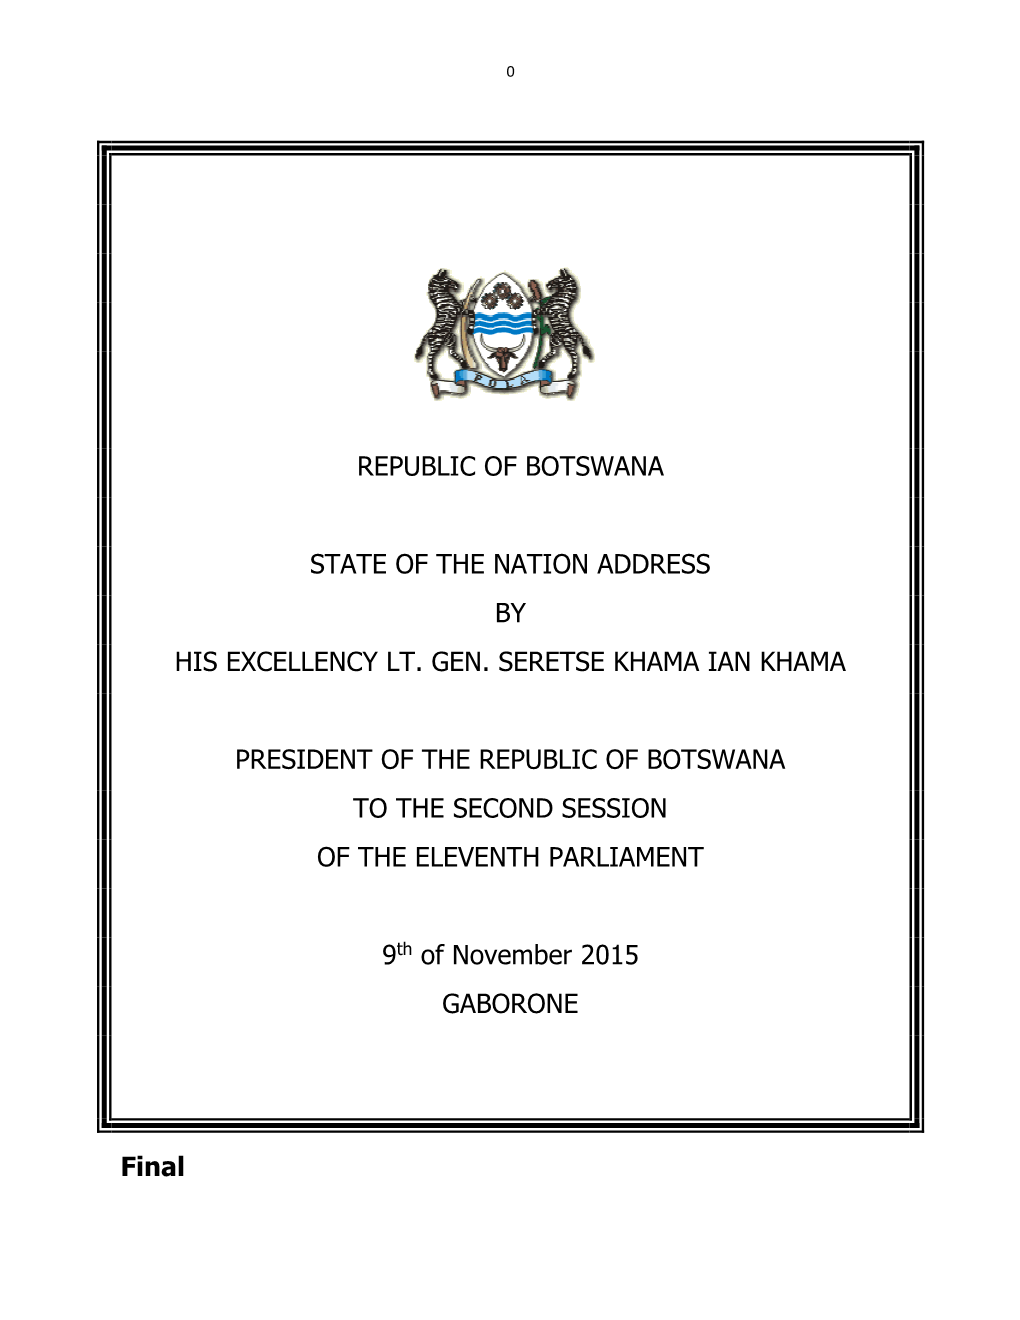 State of the Nation Address by His Excellency Lt